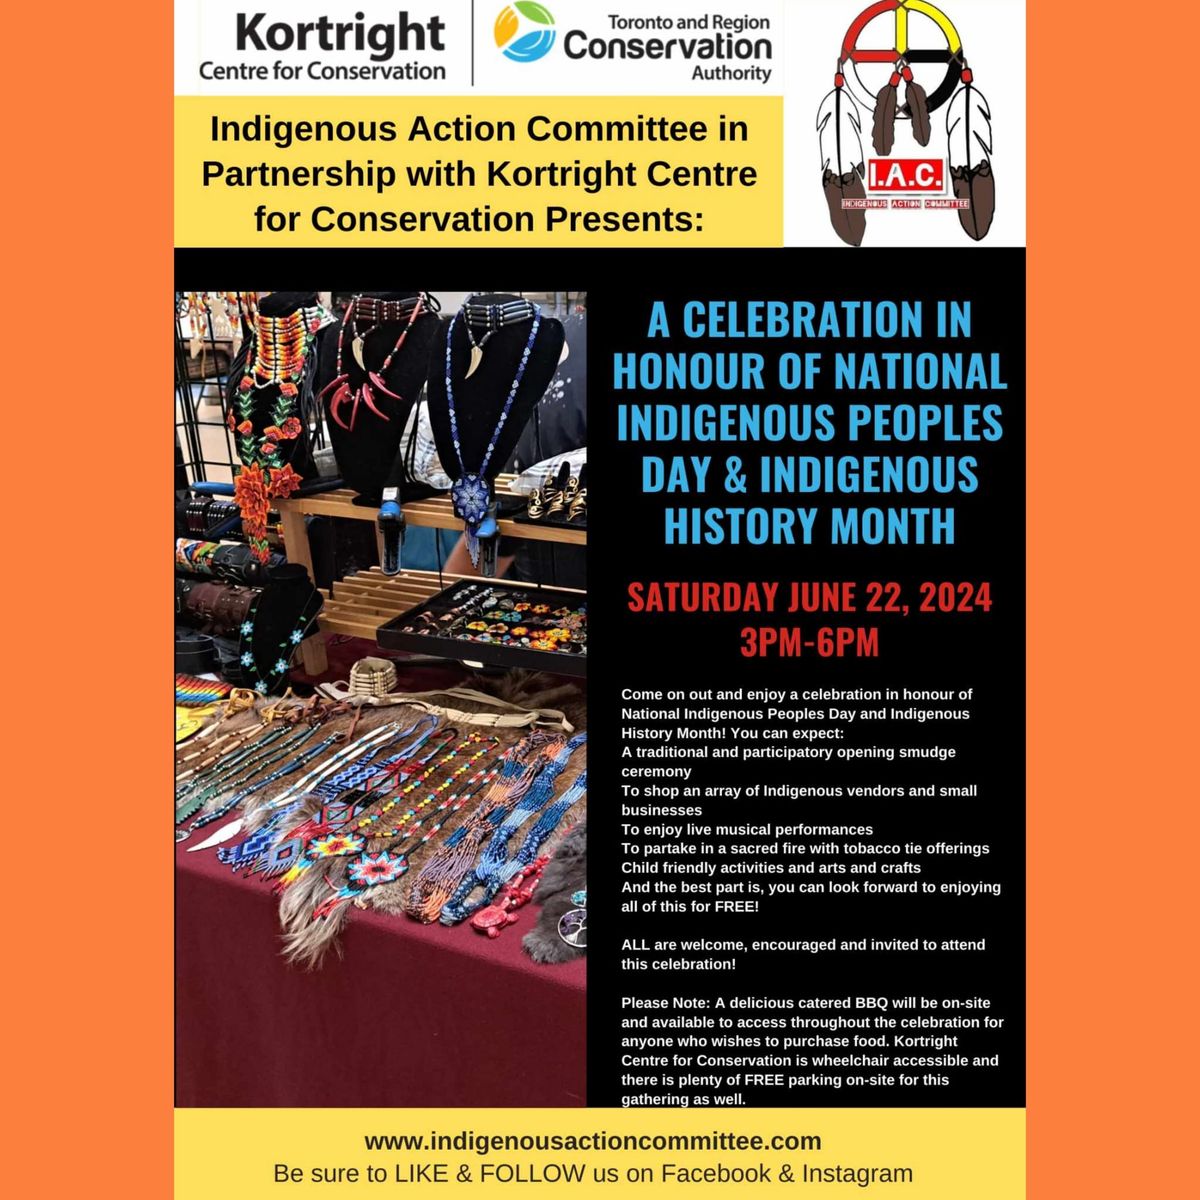 Celebration in Honour of Indigenous Peoples Day & Indigenous History Month 2024 @ Kortright Centre